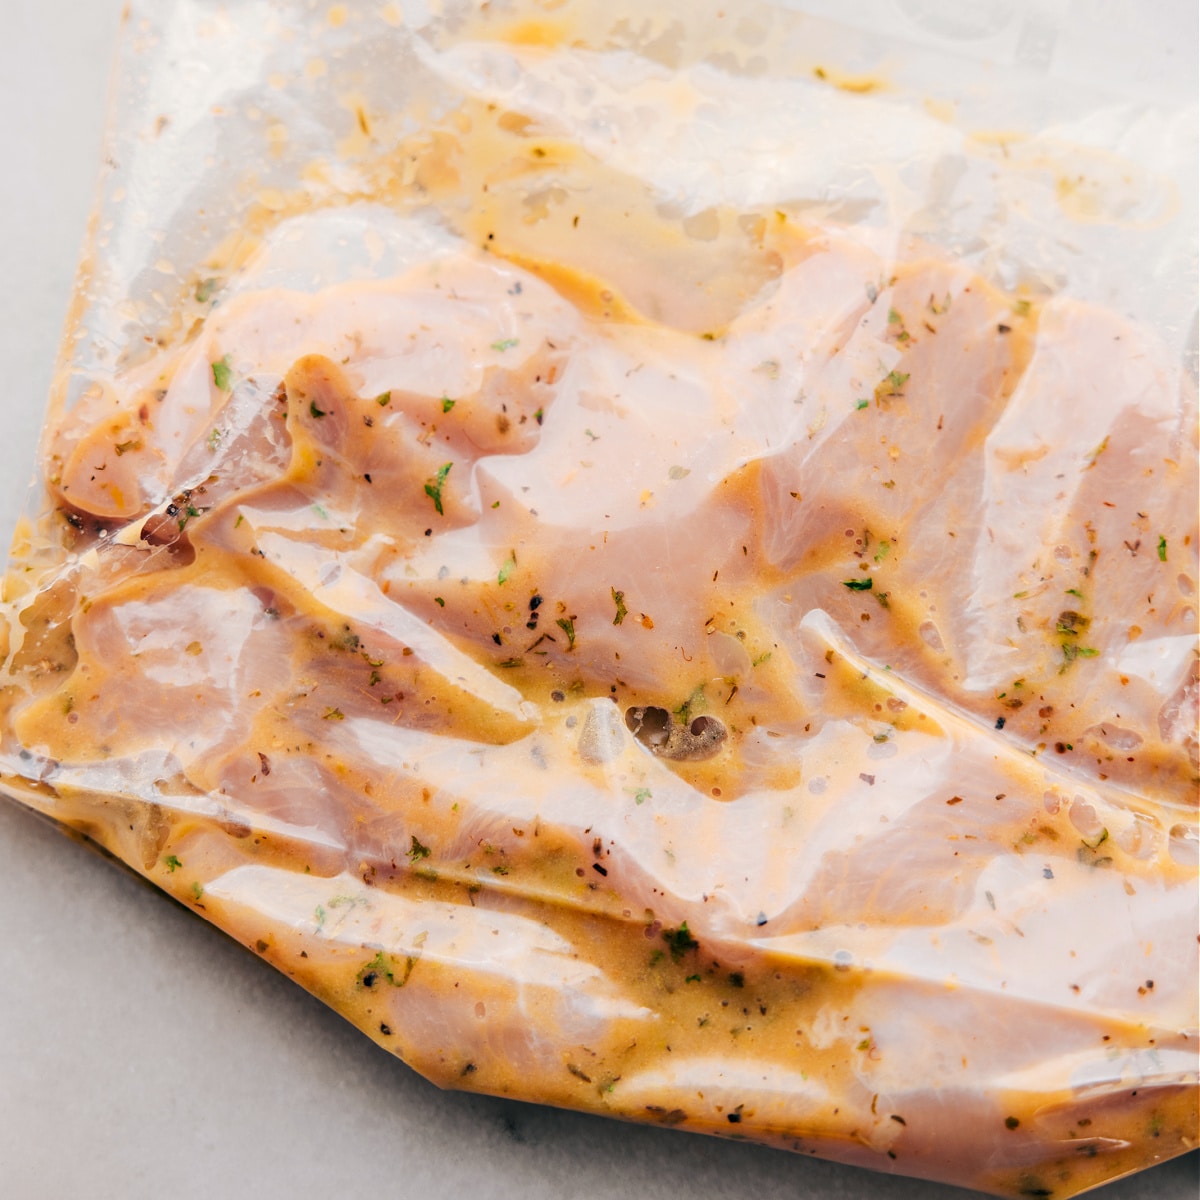 The meat marinating in the dressing in a freezer size bag.